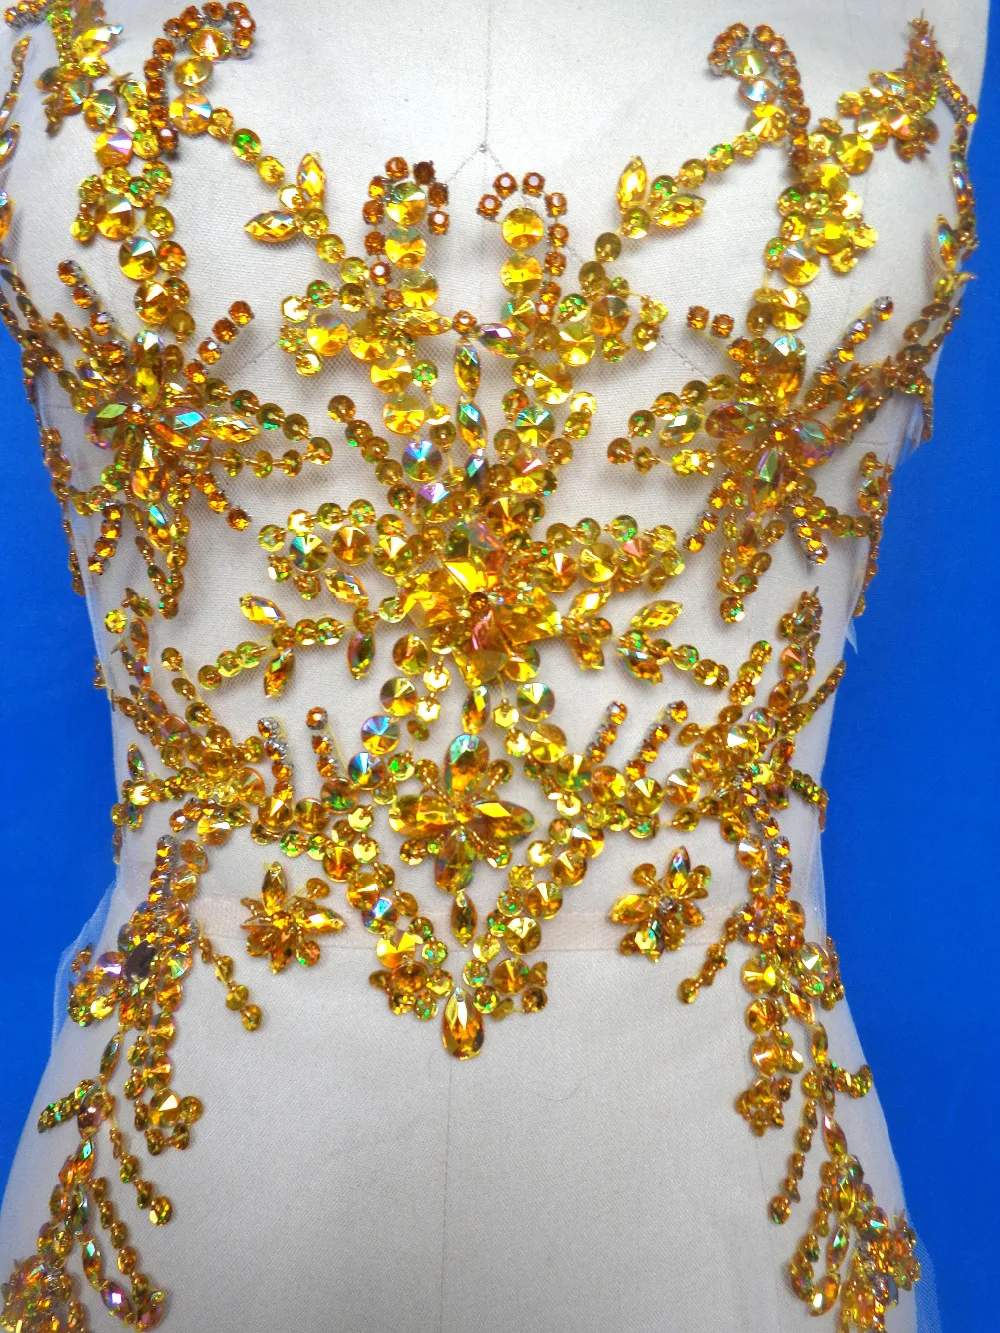 

Pure hand made dazzling golden sew on Rhinestones applique trim sequins crystals patches 49*31cm dress accessory